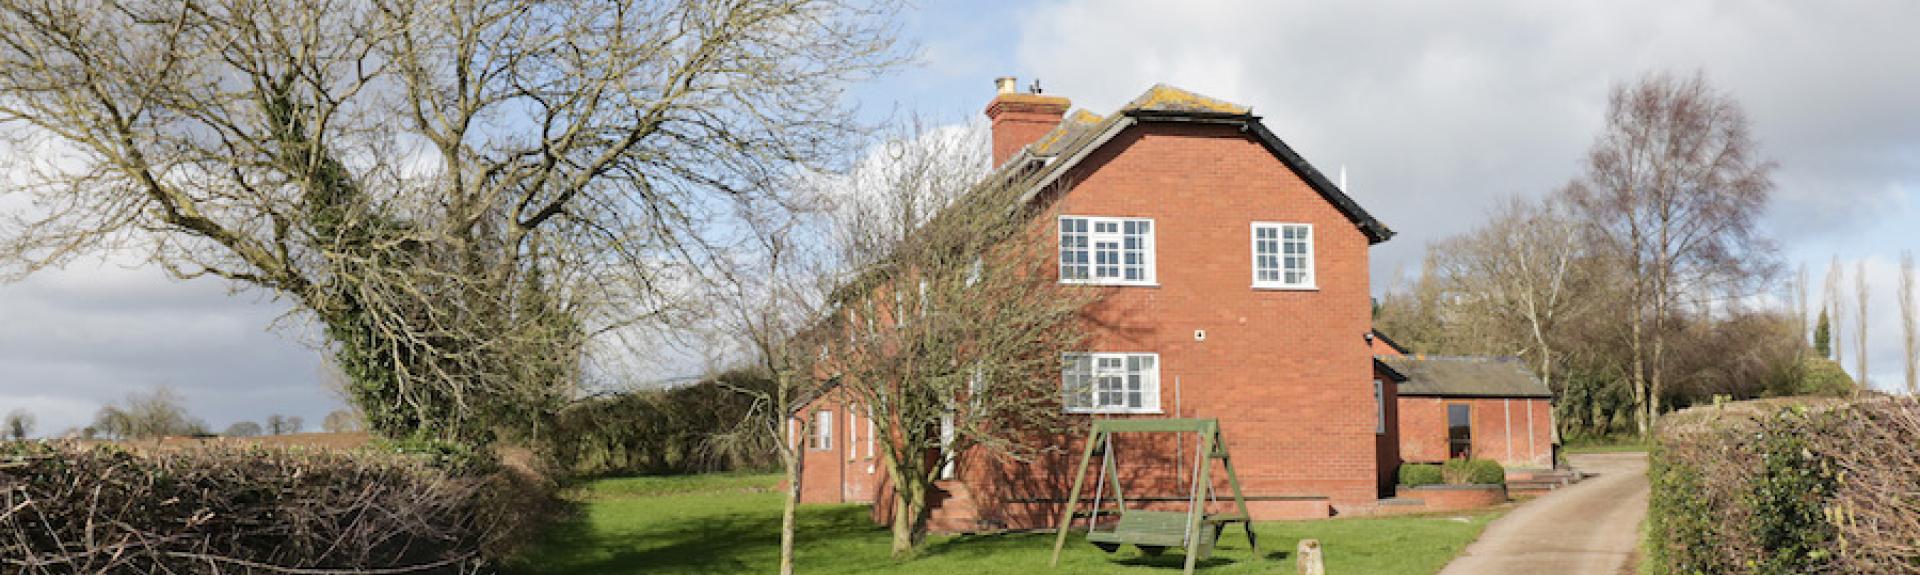 A drive leads to a brick-built Herefordshire country cottage.